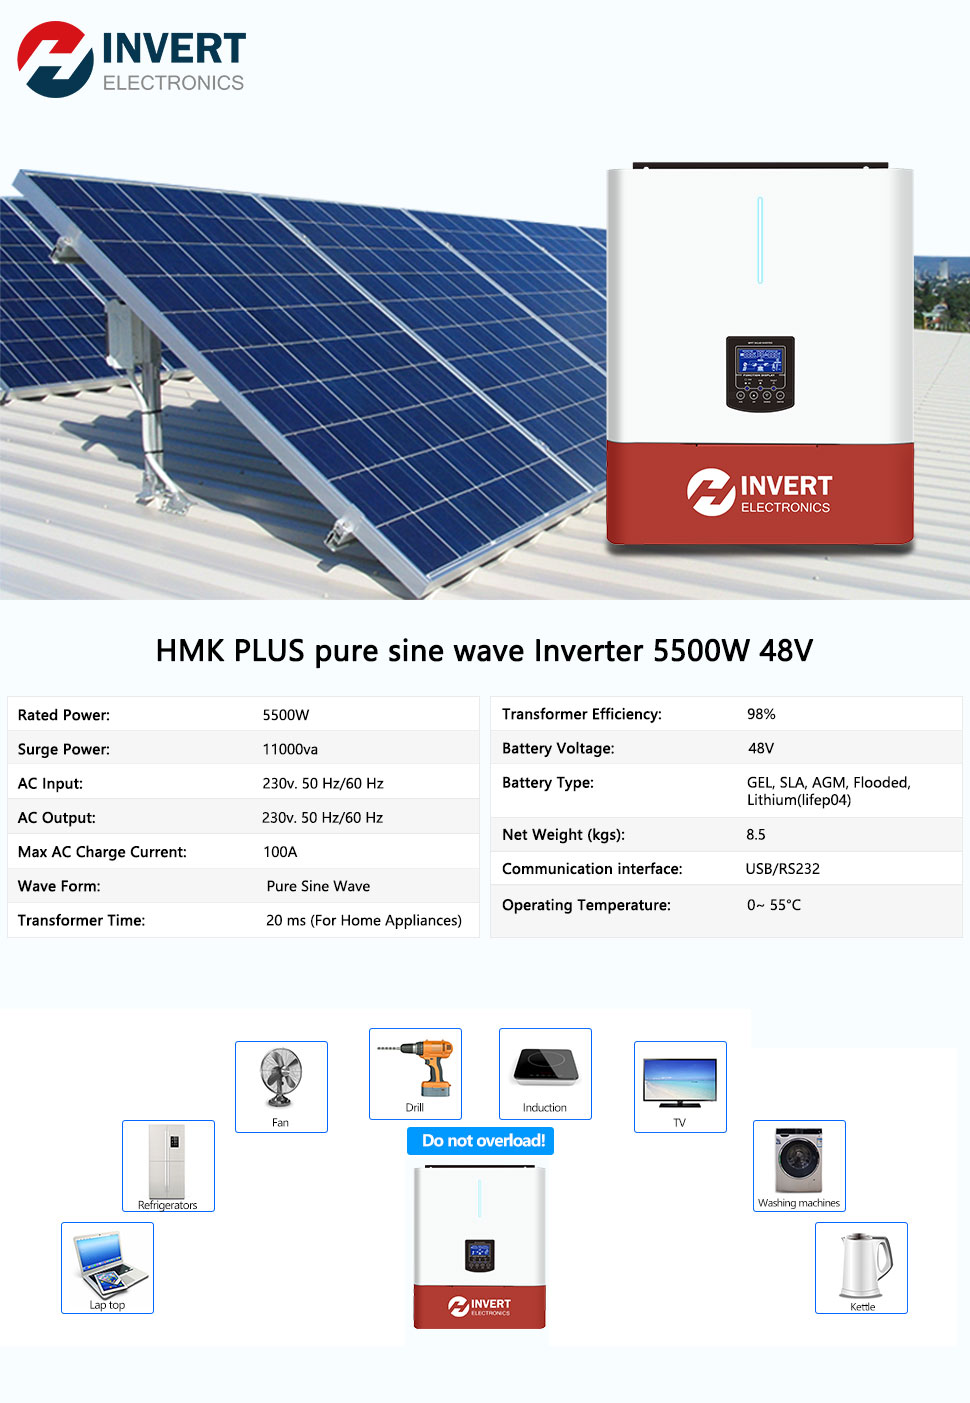 Single Phase Wall-mounted Solar Inverter for Home